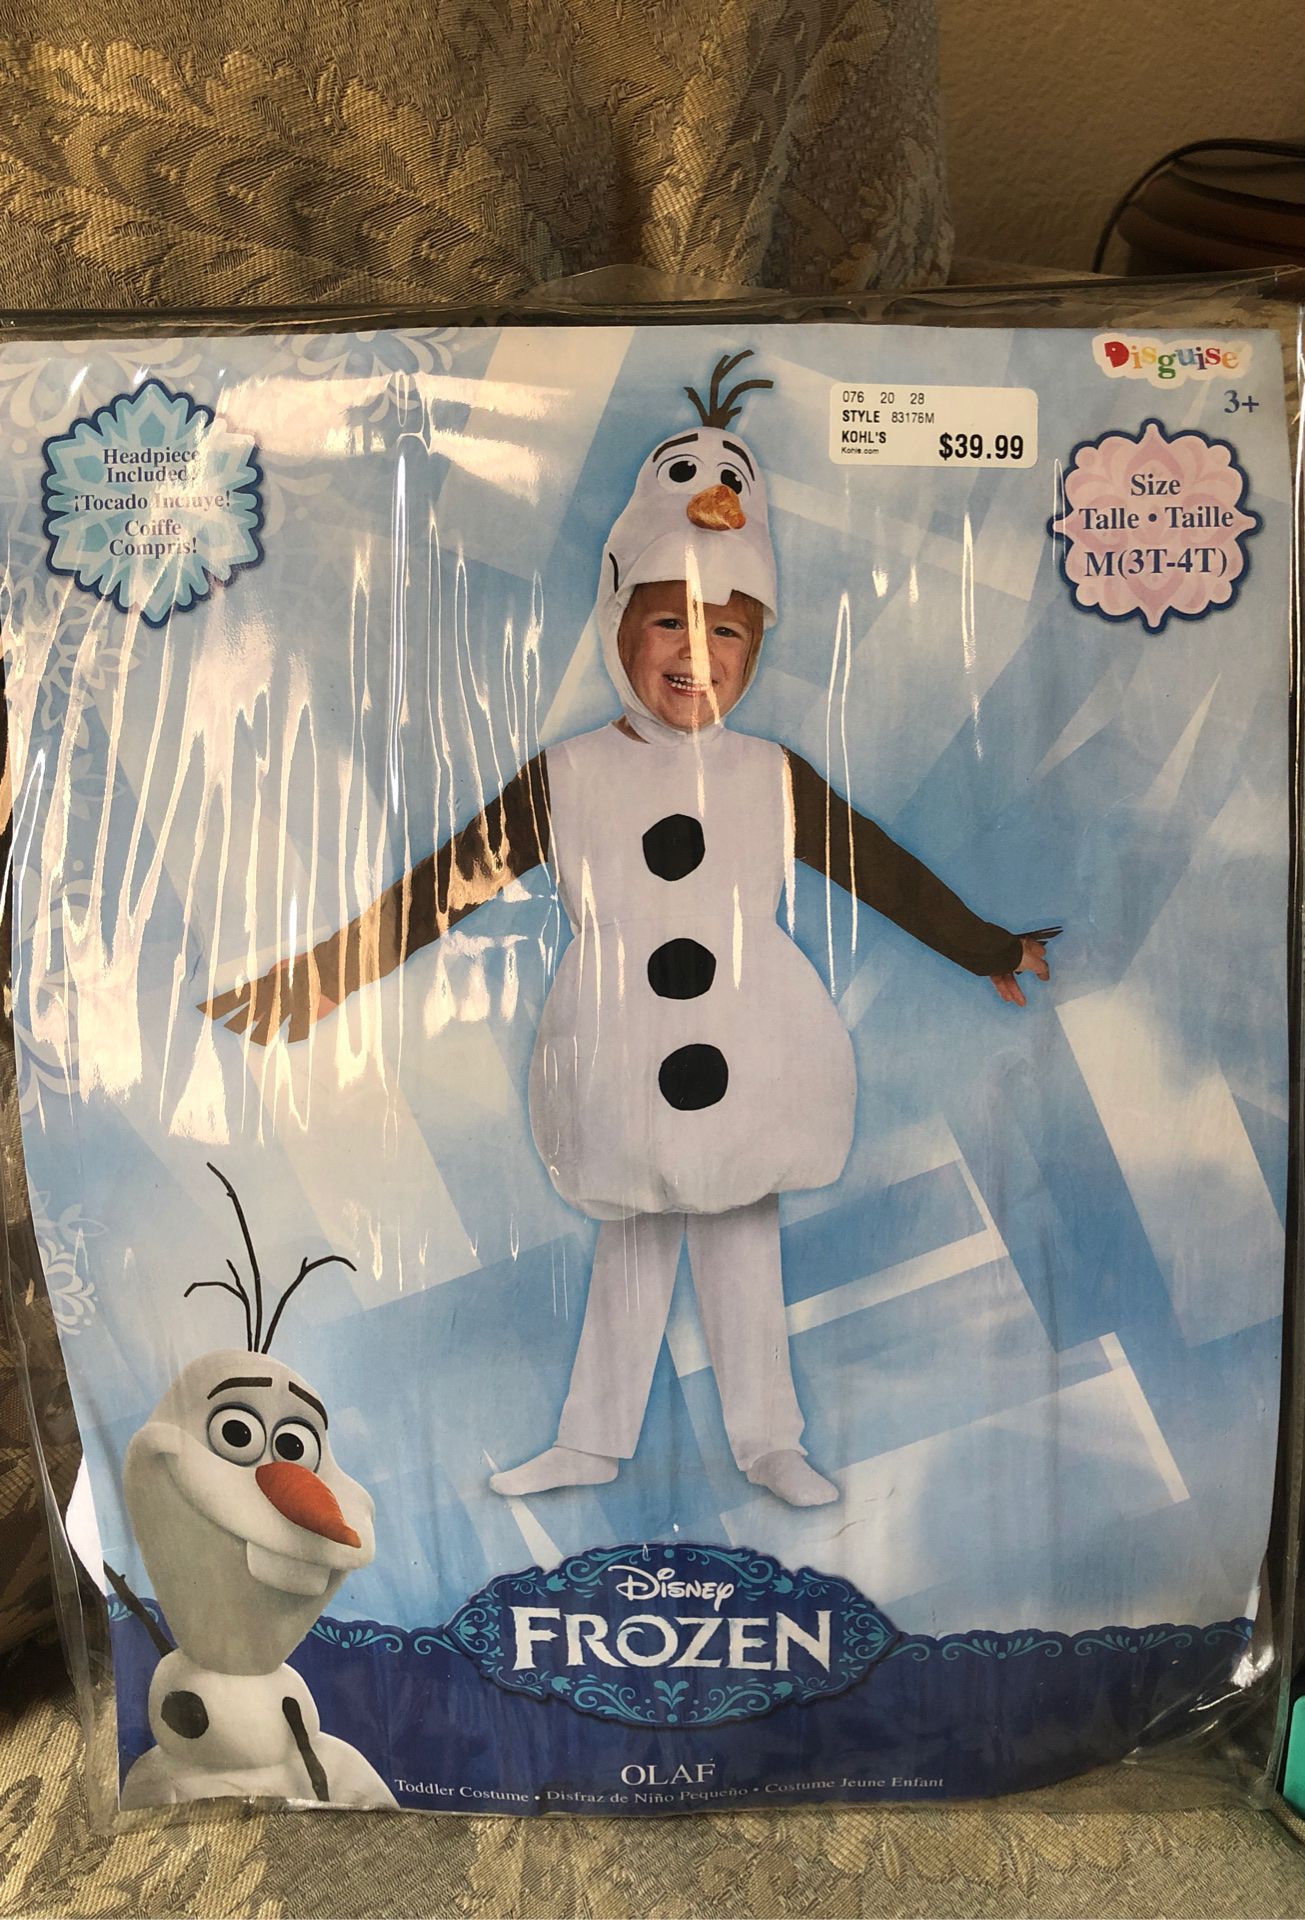 3T-4T Disney Frozen Olaf Costume New Never Used